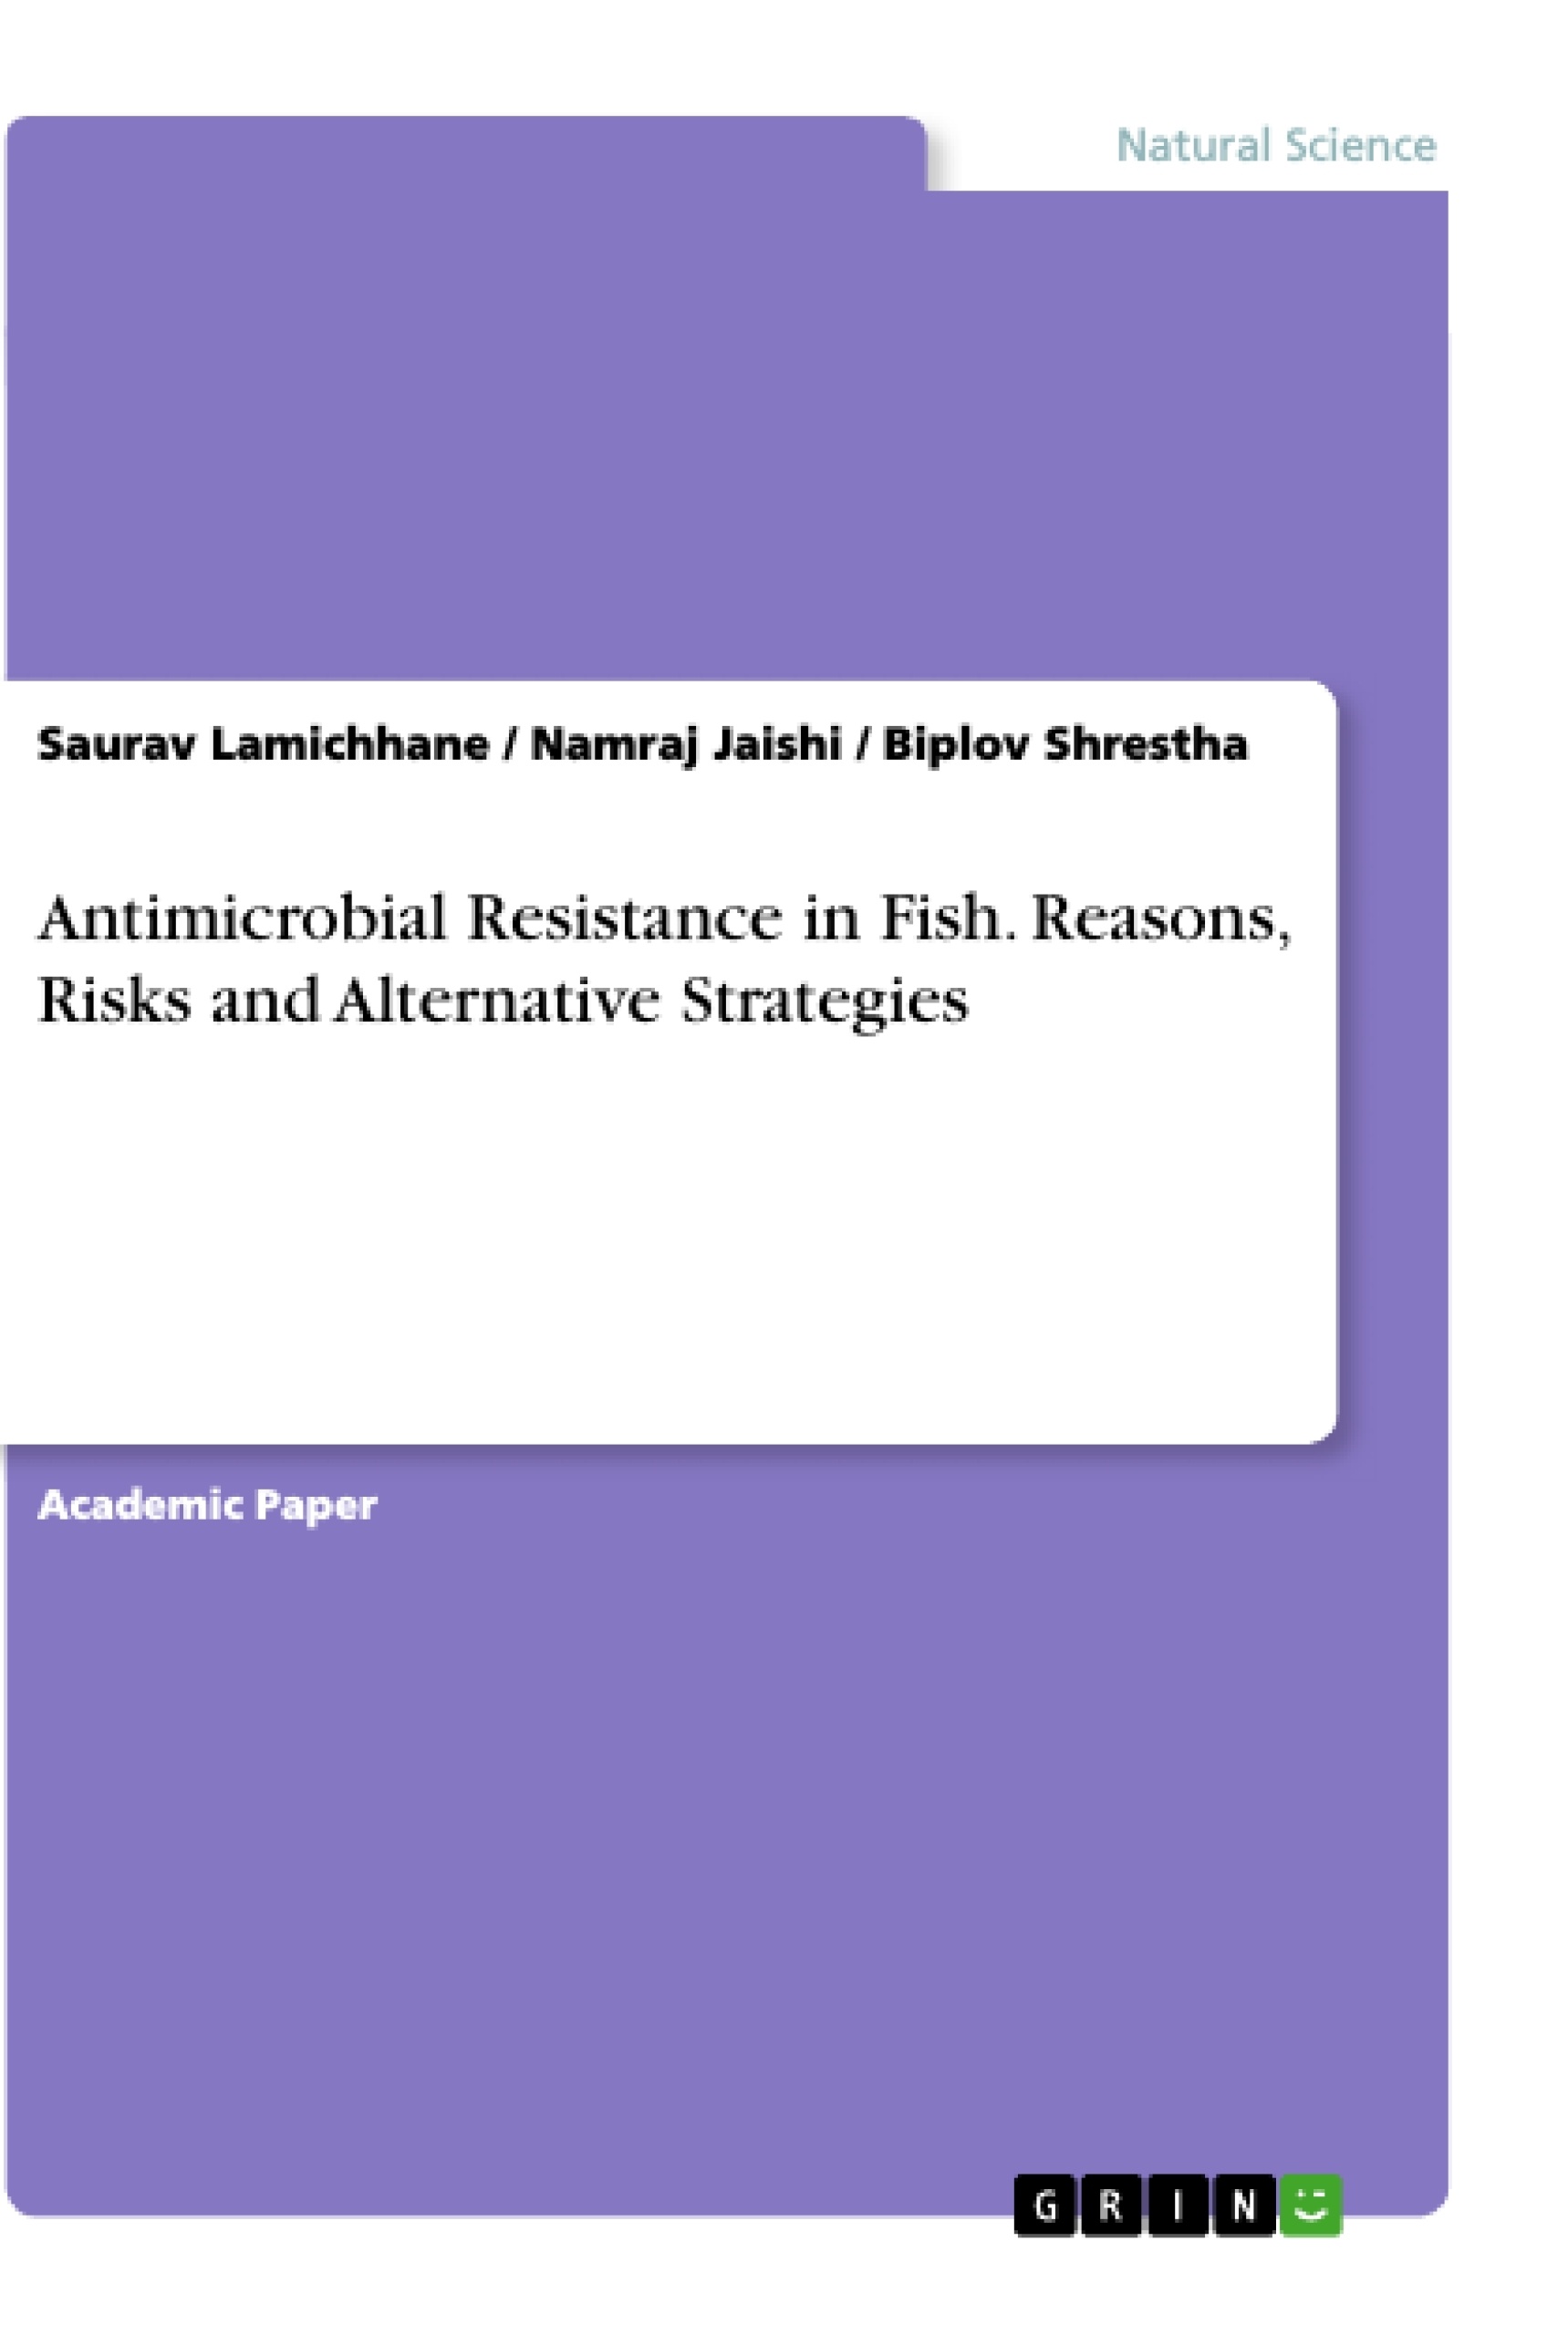 Title: Antimicrobial Resistance in Fish. Reasons, Risks and Alternative Strategies